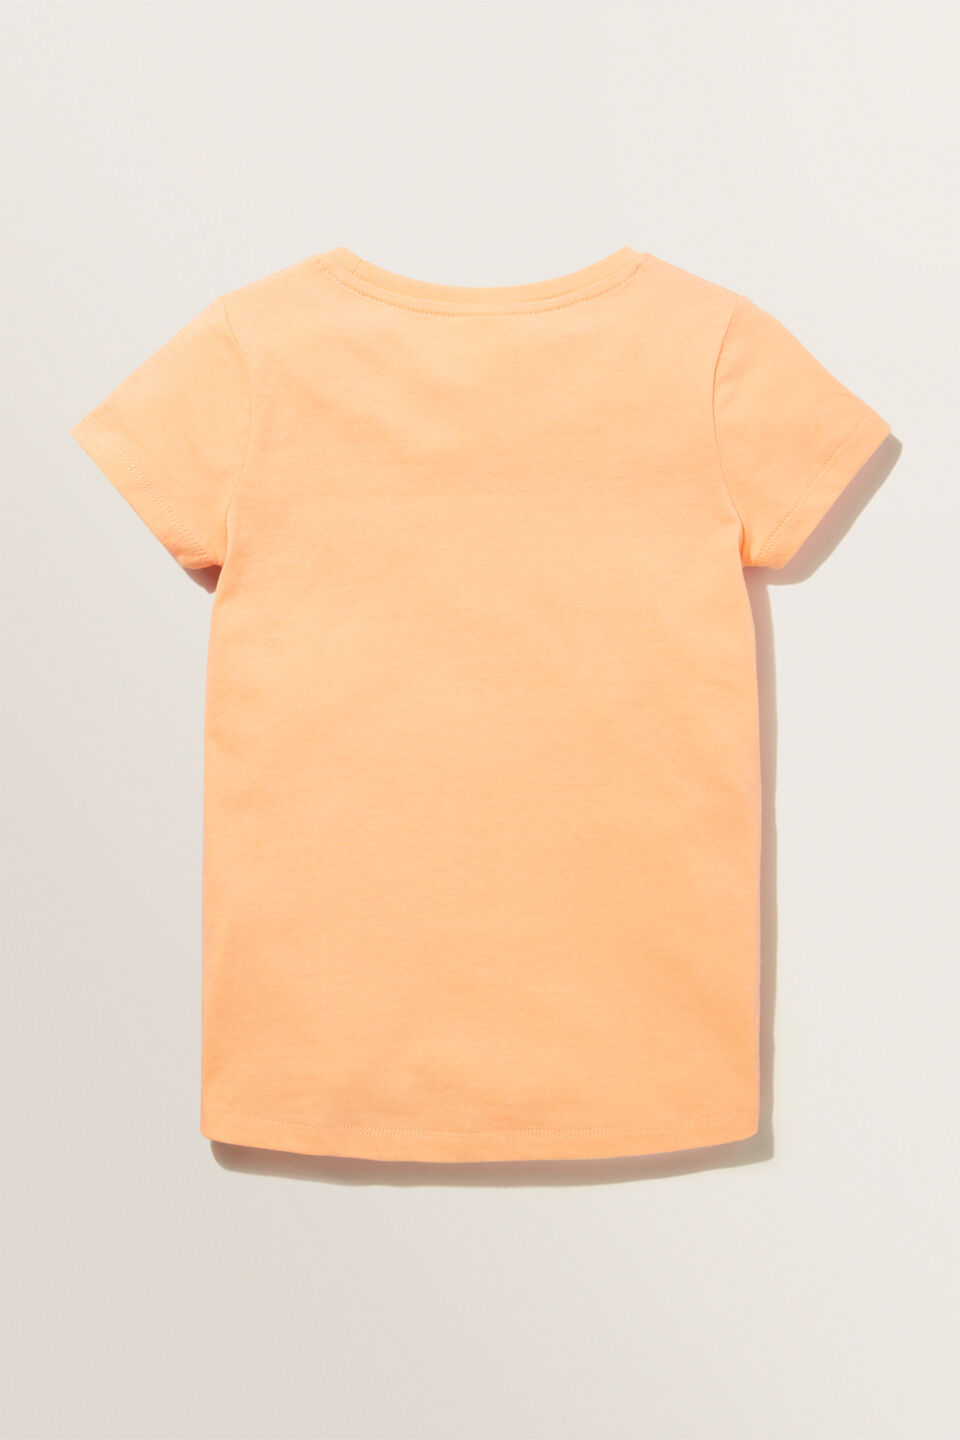 Chenille Flower Tee  Apricot